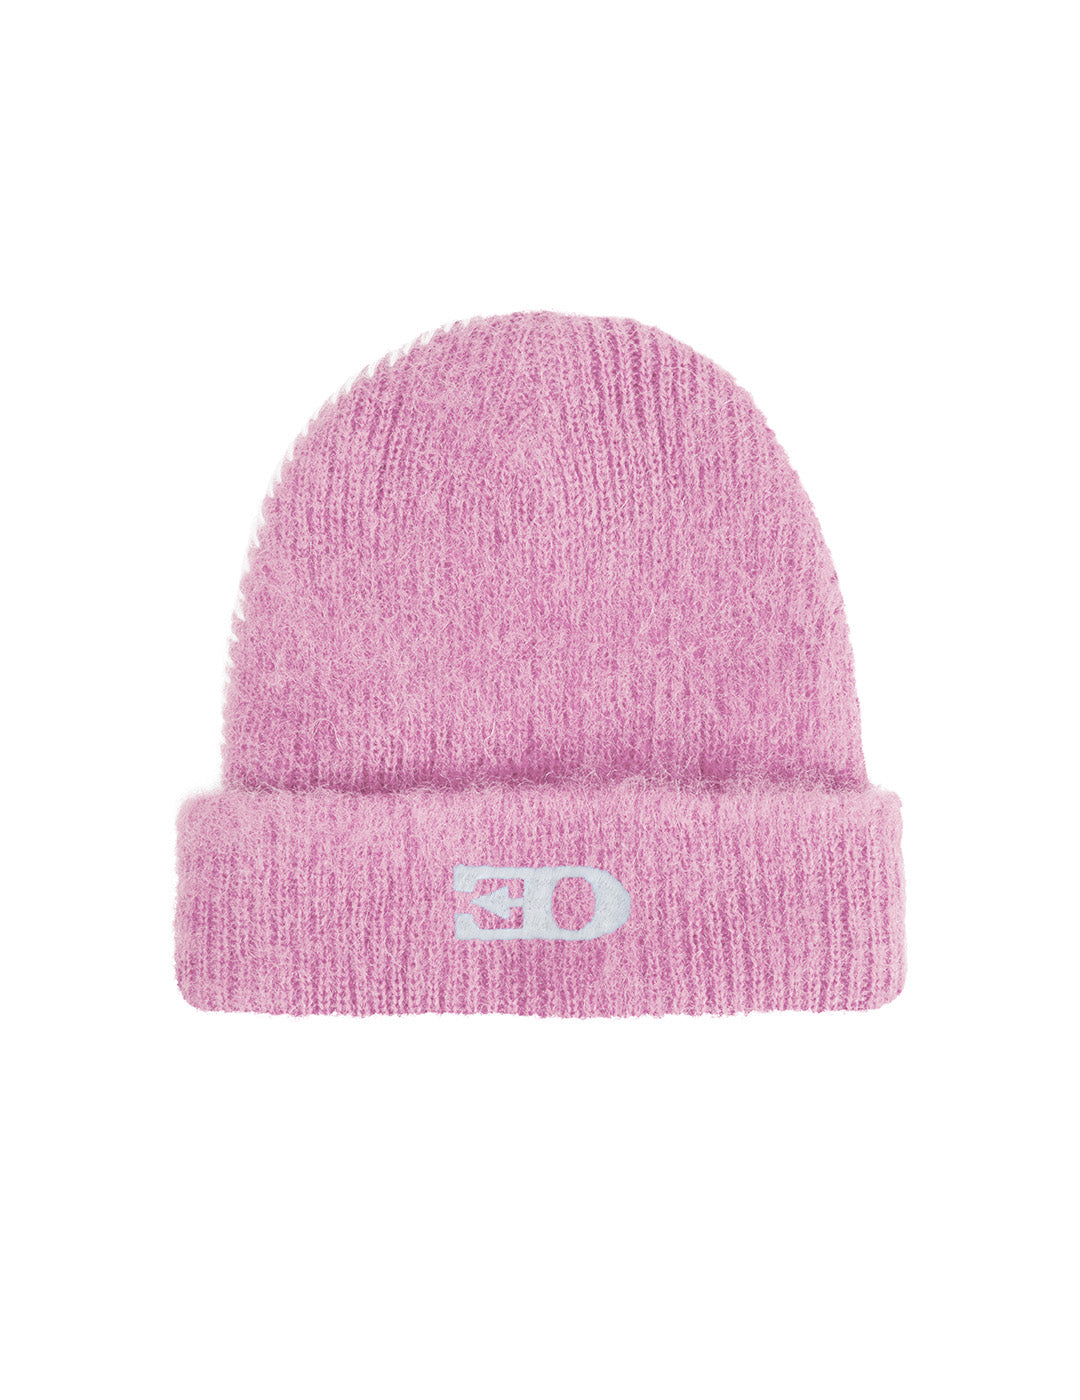 THE BEANIE IN PINK MOHAIR